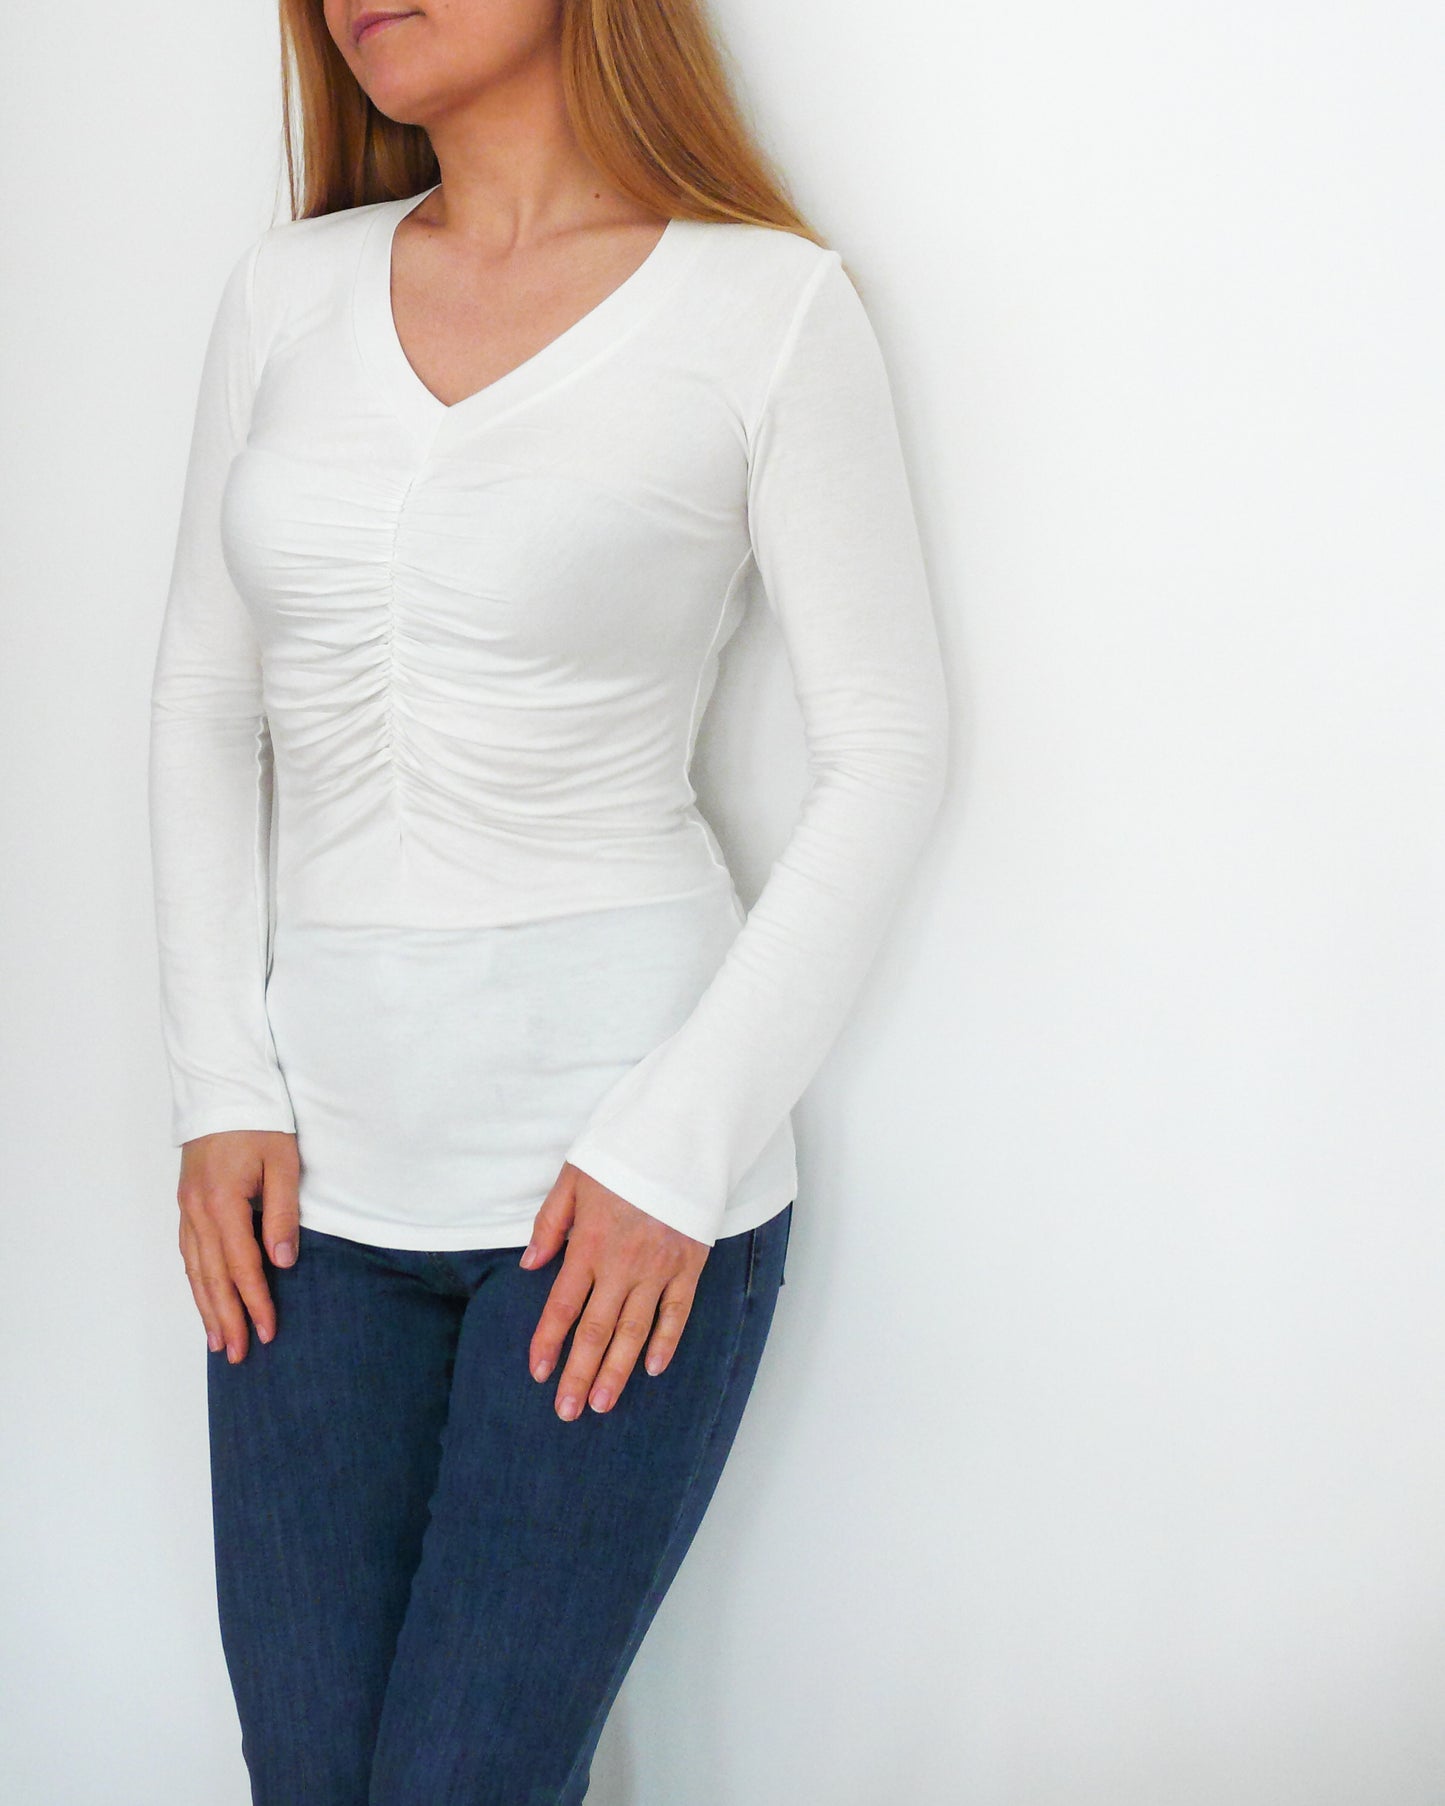 V-Neck Rouched Top Sewing Pattern N.88